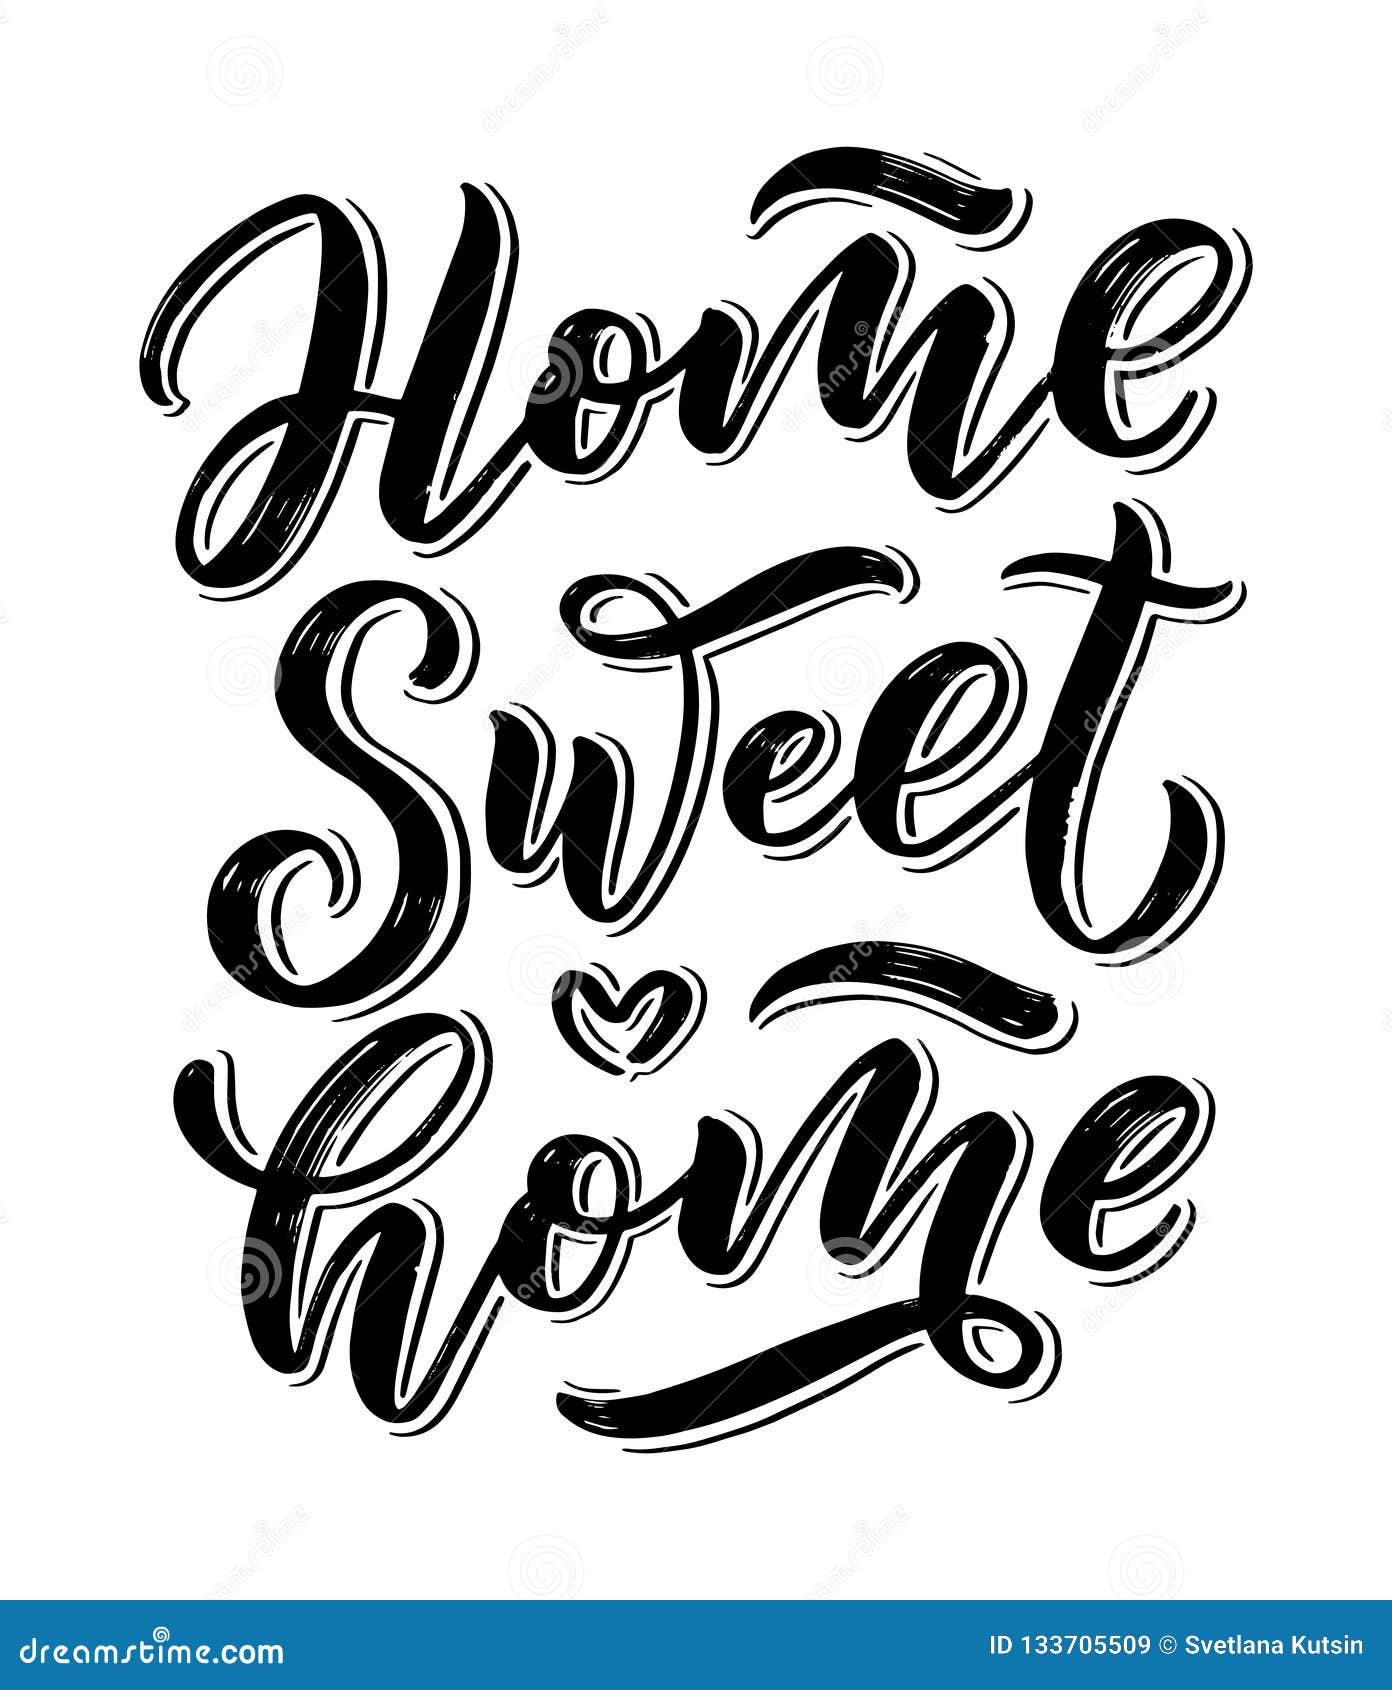 Phrase Home is where you are. Hand drawn lettering in shape of